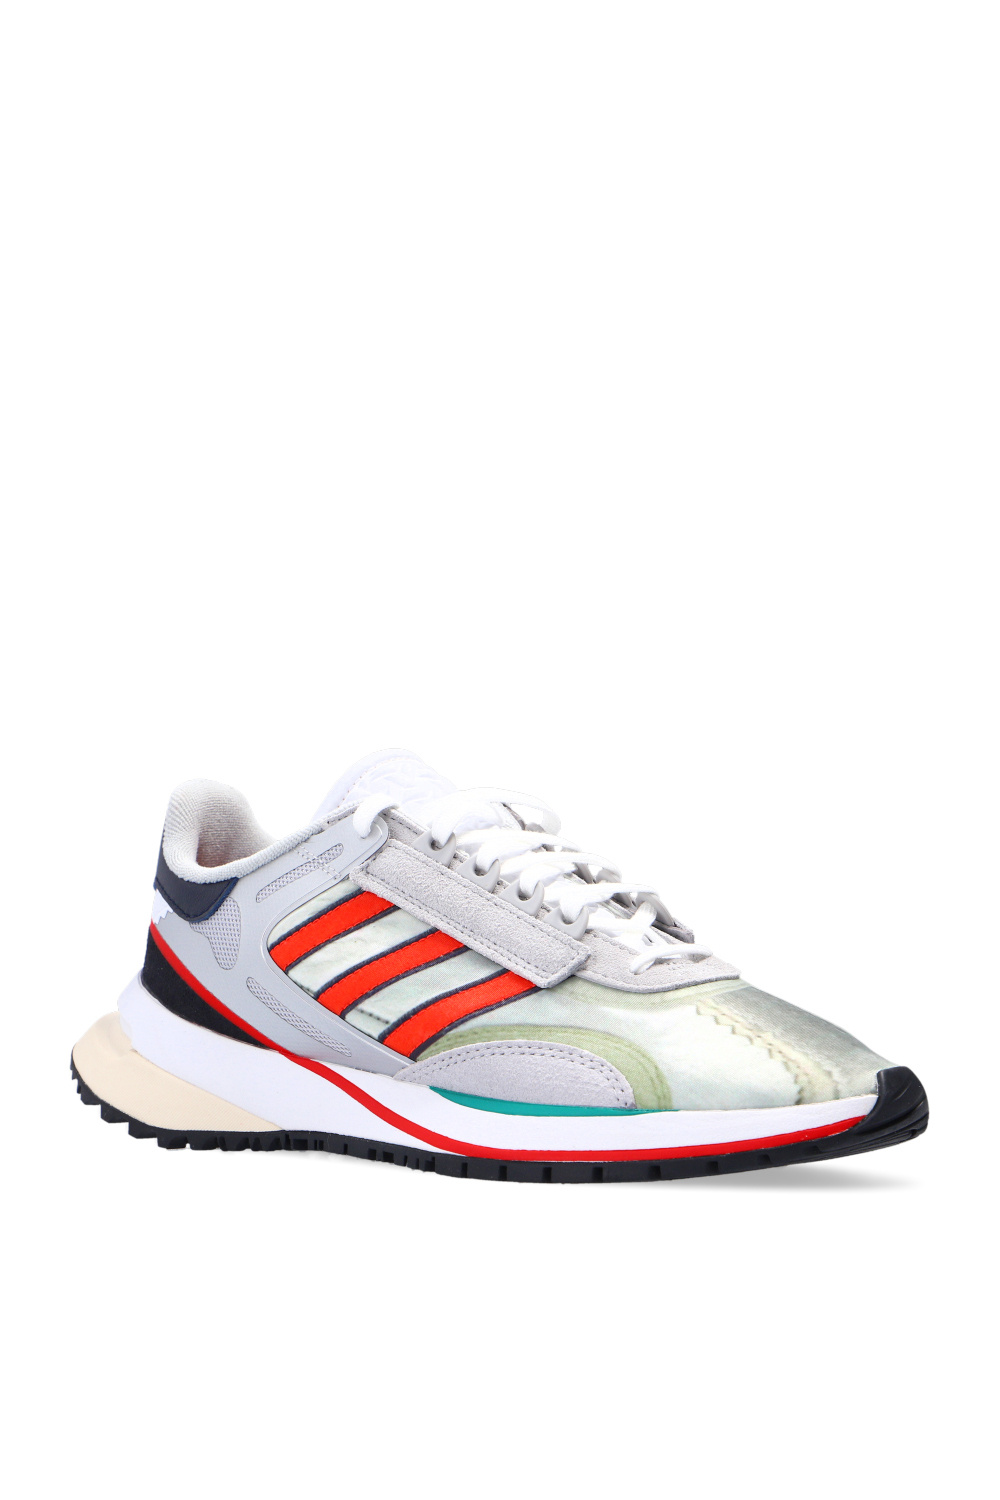 Valerance' sneakers ADIDAS Originals - adidas by4007 shoes size chart for  women - StclaircomoShops Mali